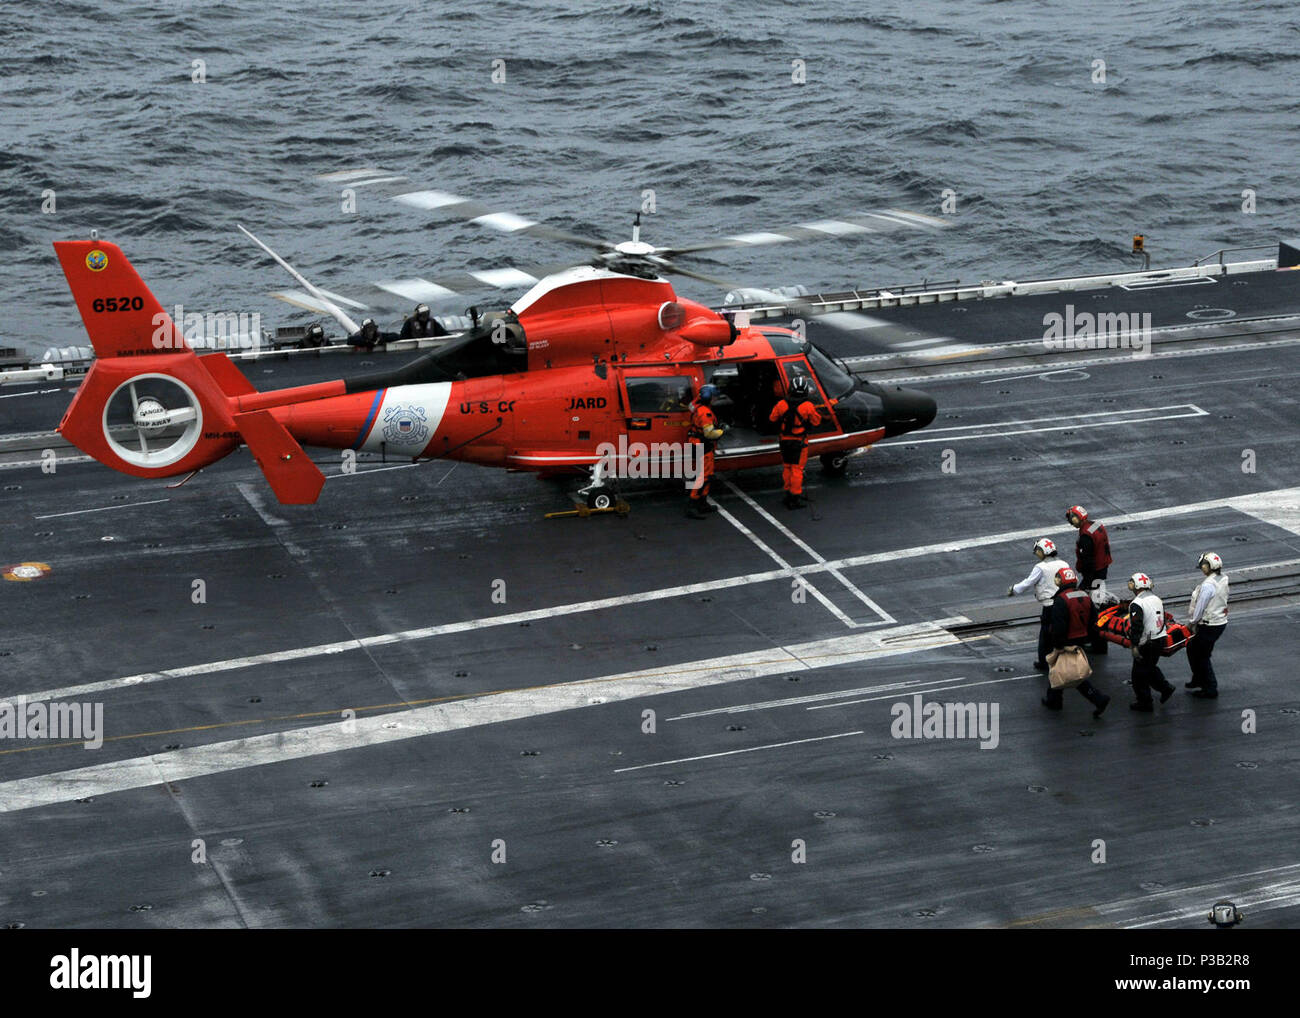 OCEAN (Dec. 14, 2008) An injured merchant sailor from the Liberian cargo ship 'Marie Rickmers' is loaded onto a Coast Guard MH-65 Dolphin helicopter after receiving basic medical attention aboard the aircraft carrier USS Abraham Lincoln (CVN 72). U.S. Navy Stock Photo